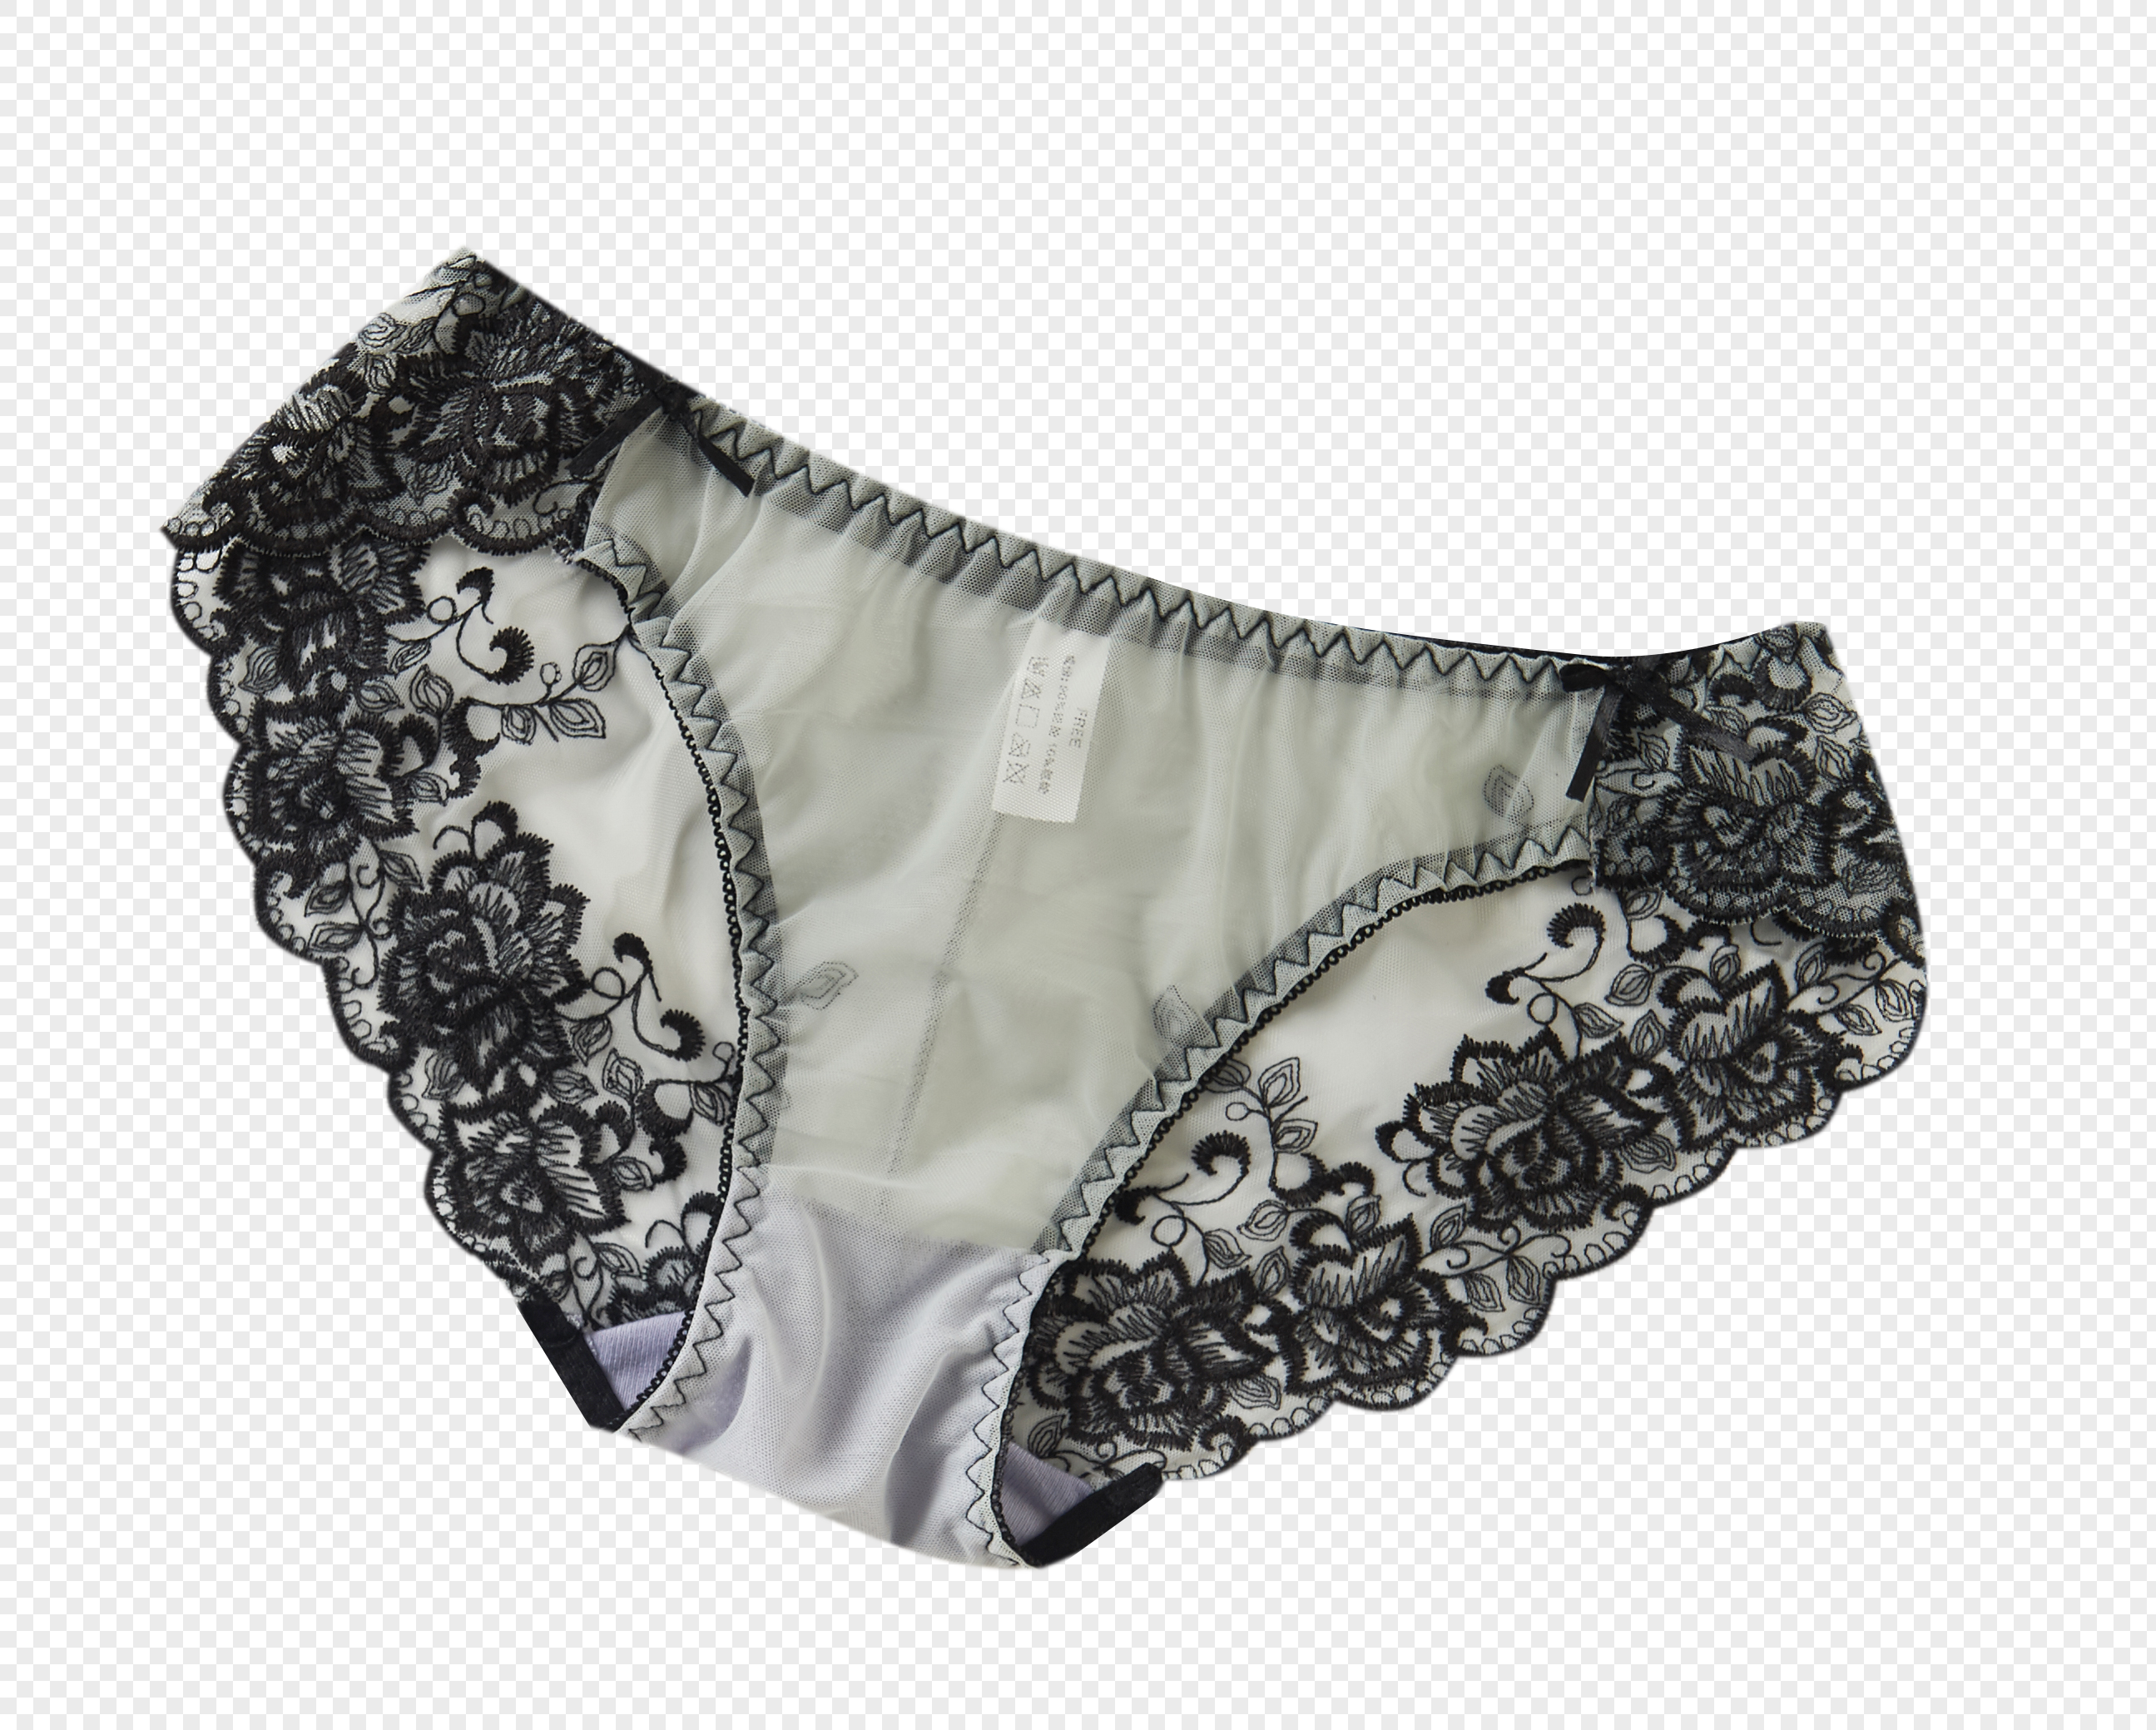 Ladies Underwear PNG Images With Transparent Background